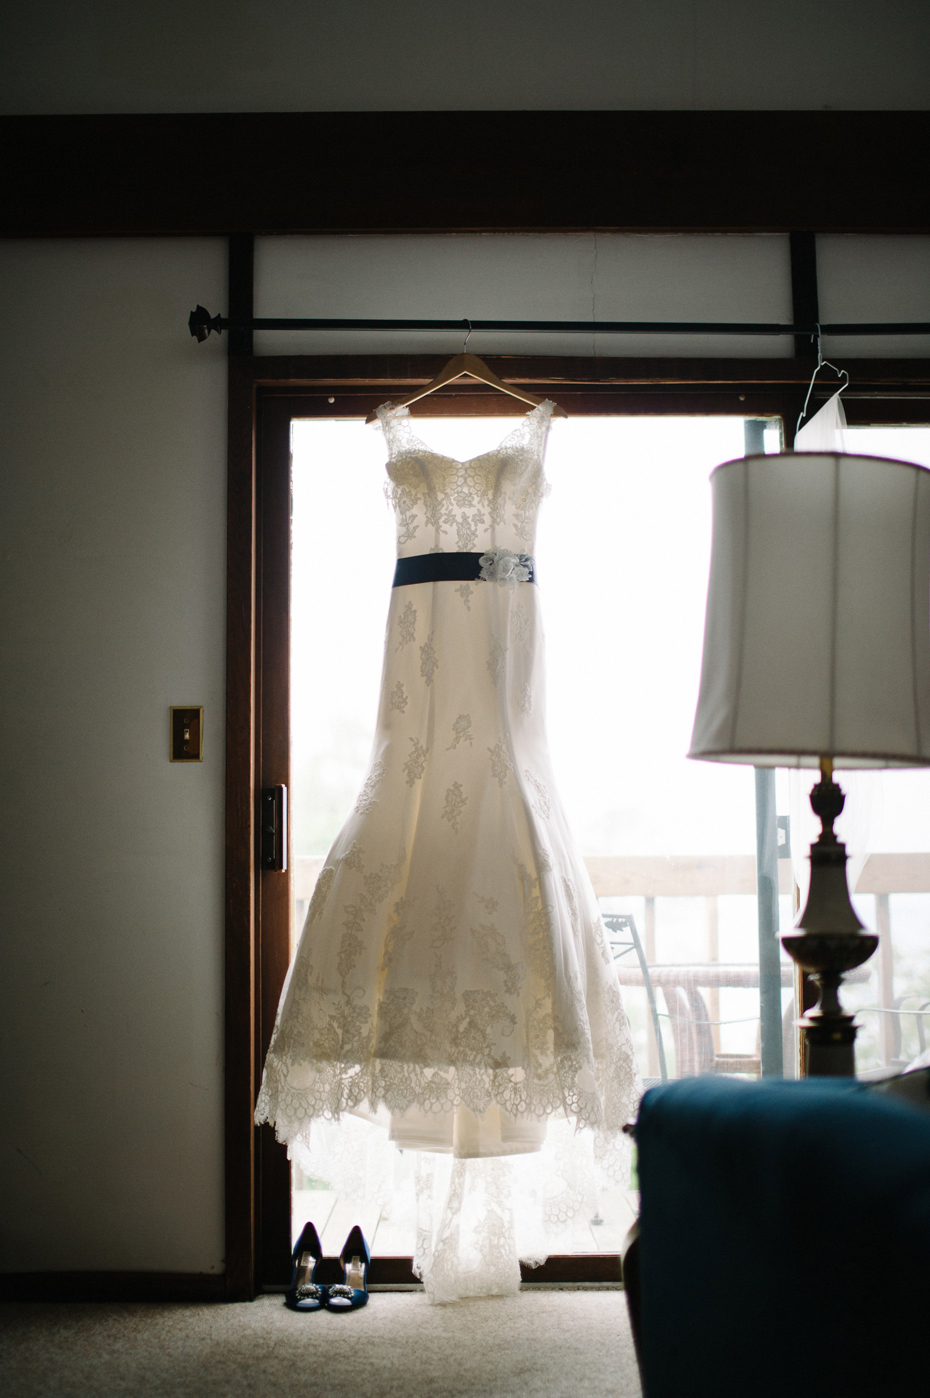 A wedding dress waits for the bride before her wedding at The Inn at Stonecliffe on Mackinac Island by Michigan Wedding Photographer Heather Jowett.